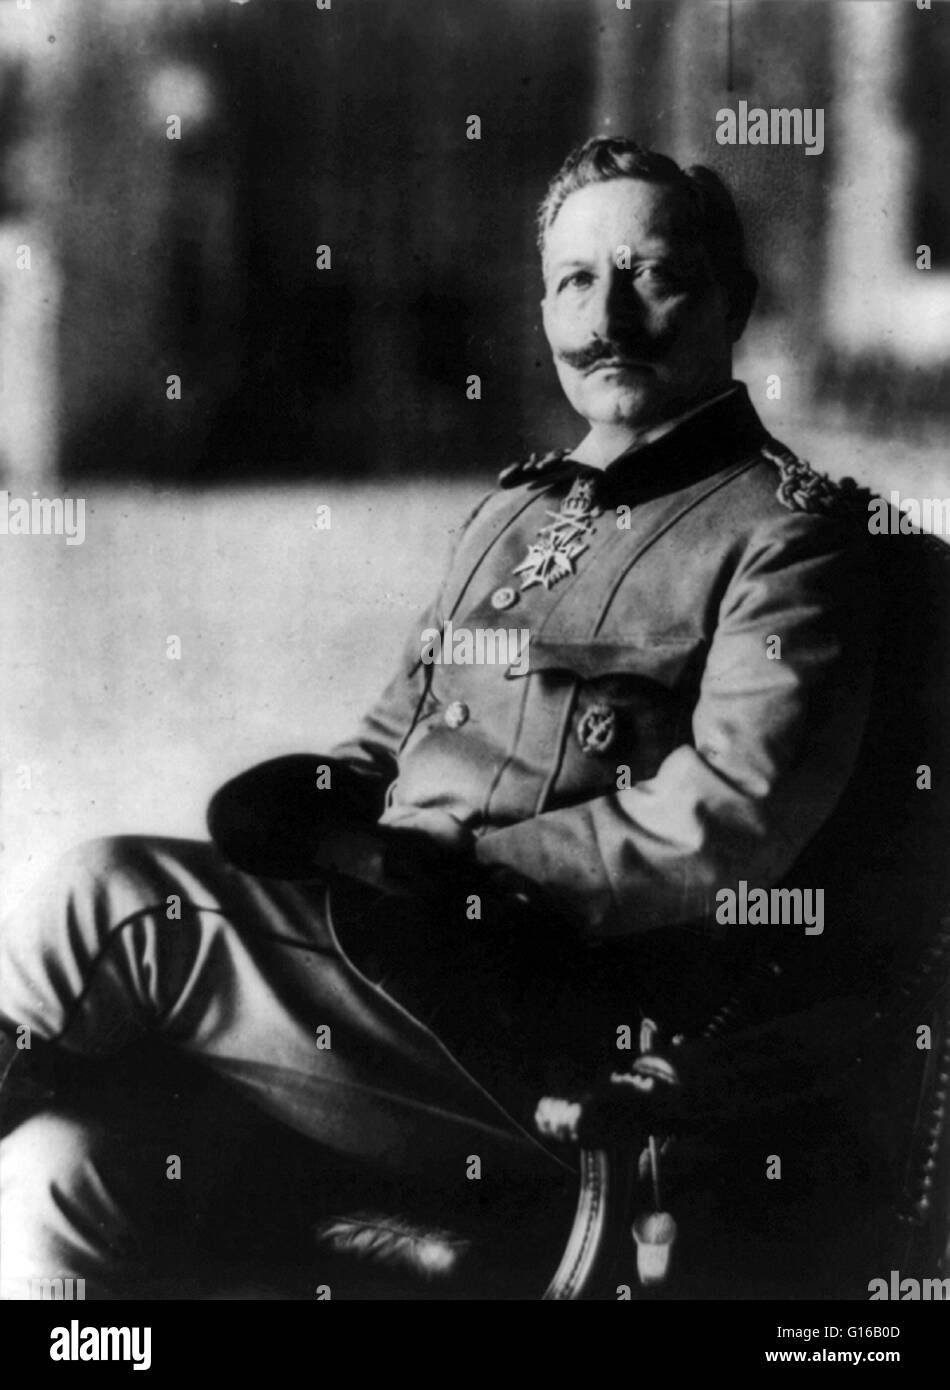 Wilhelm II photographed in 1915. Wilhelm II (January 27, 1859 - June 4, 1941) was the last German Kaiser and King of Prussia, ruling the German Empire and the Kingdom of Prussia from 1888 to 1918. Crowned in 1888, he dismissed the Chancellor, Otto von Bis Stock Photo